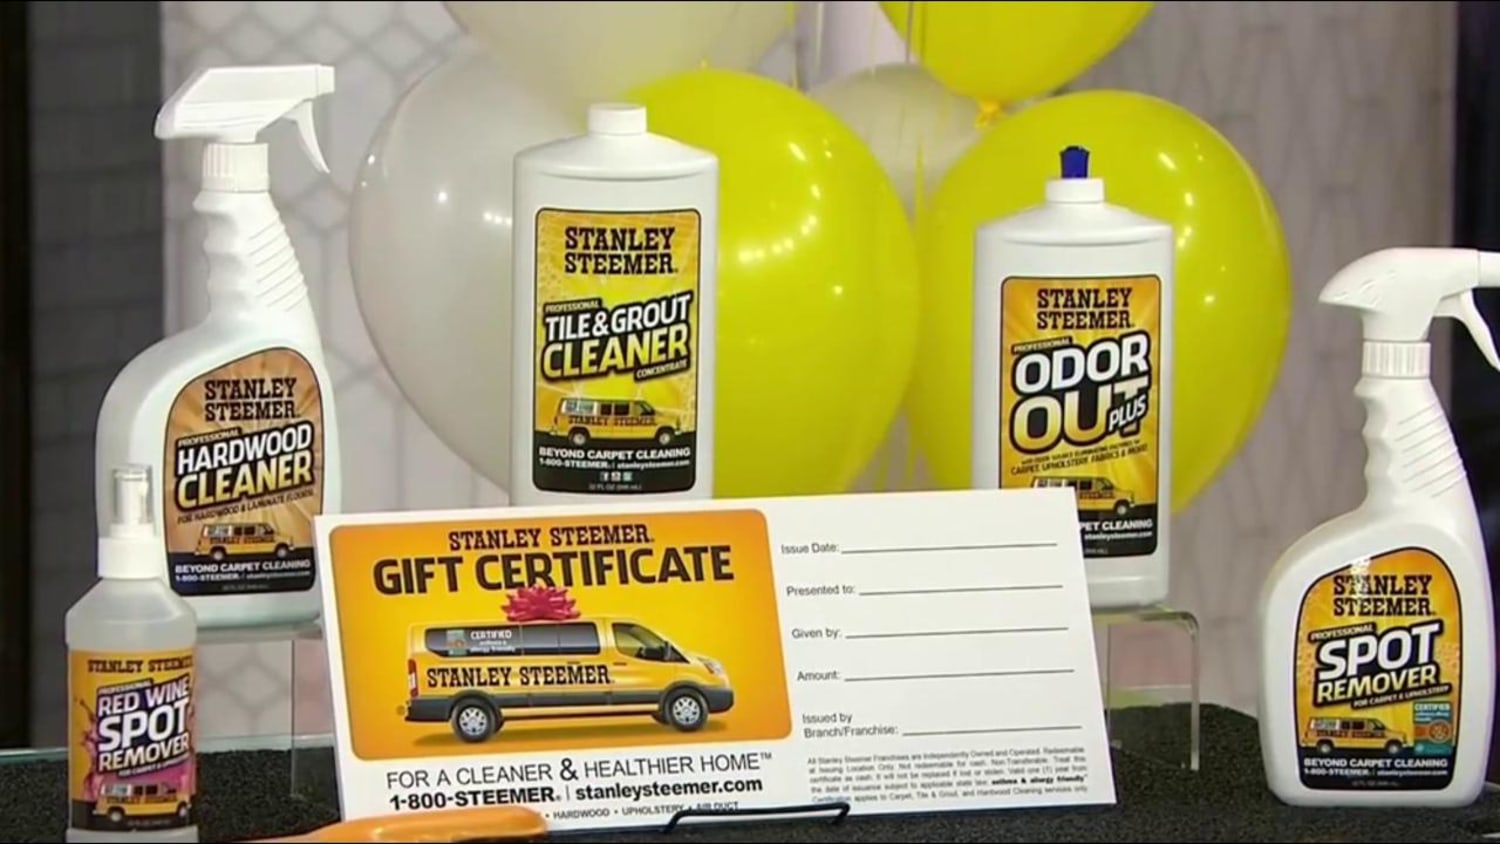 How to Use Stanley Steemer Tile & Grout Cleaner